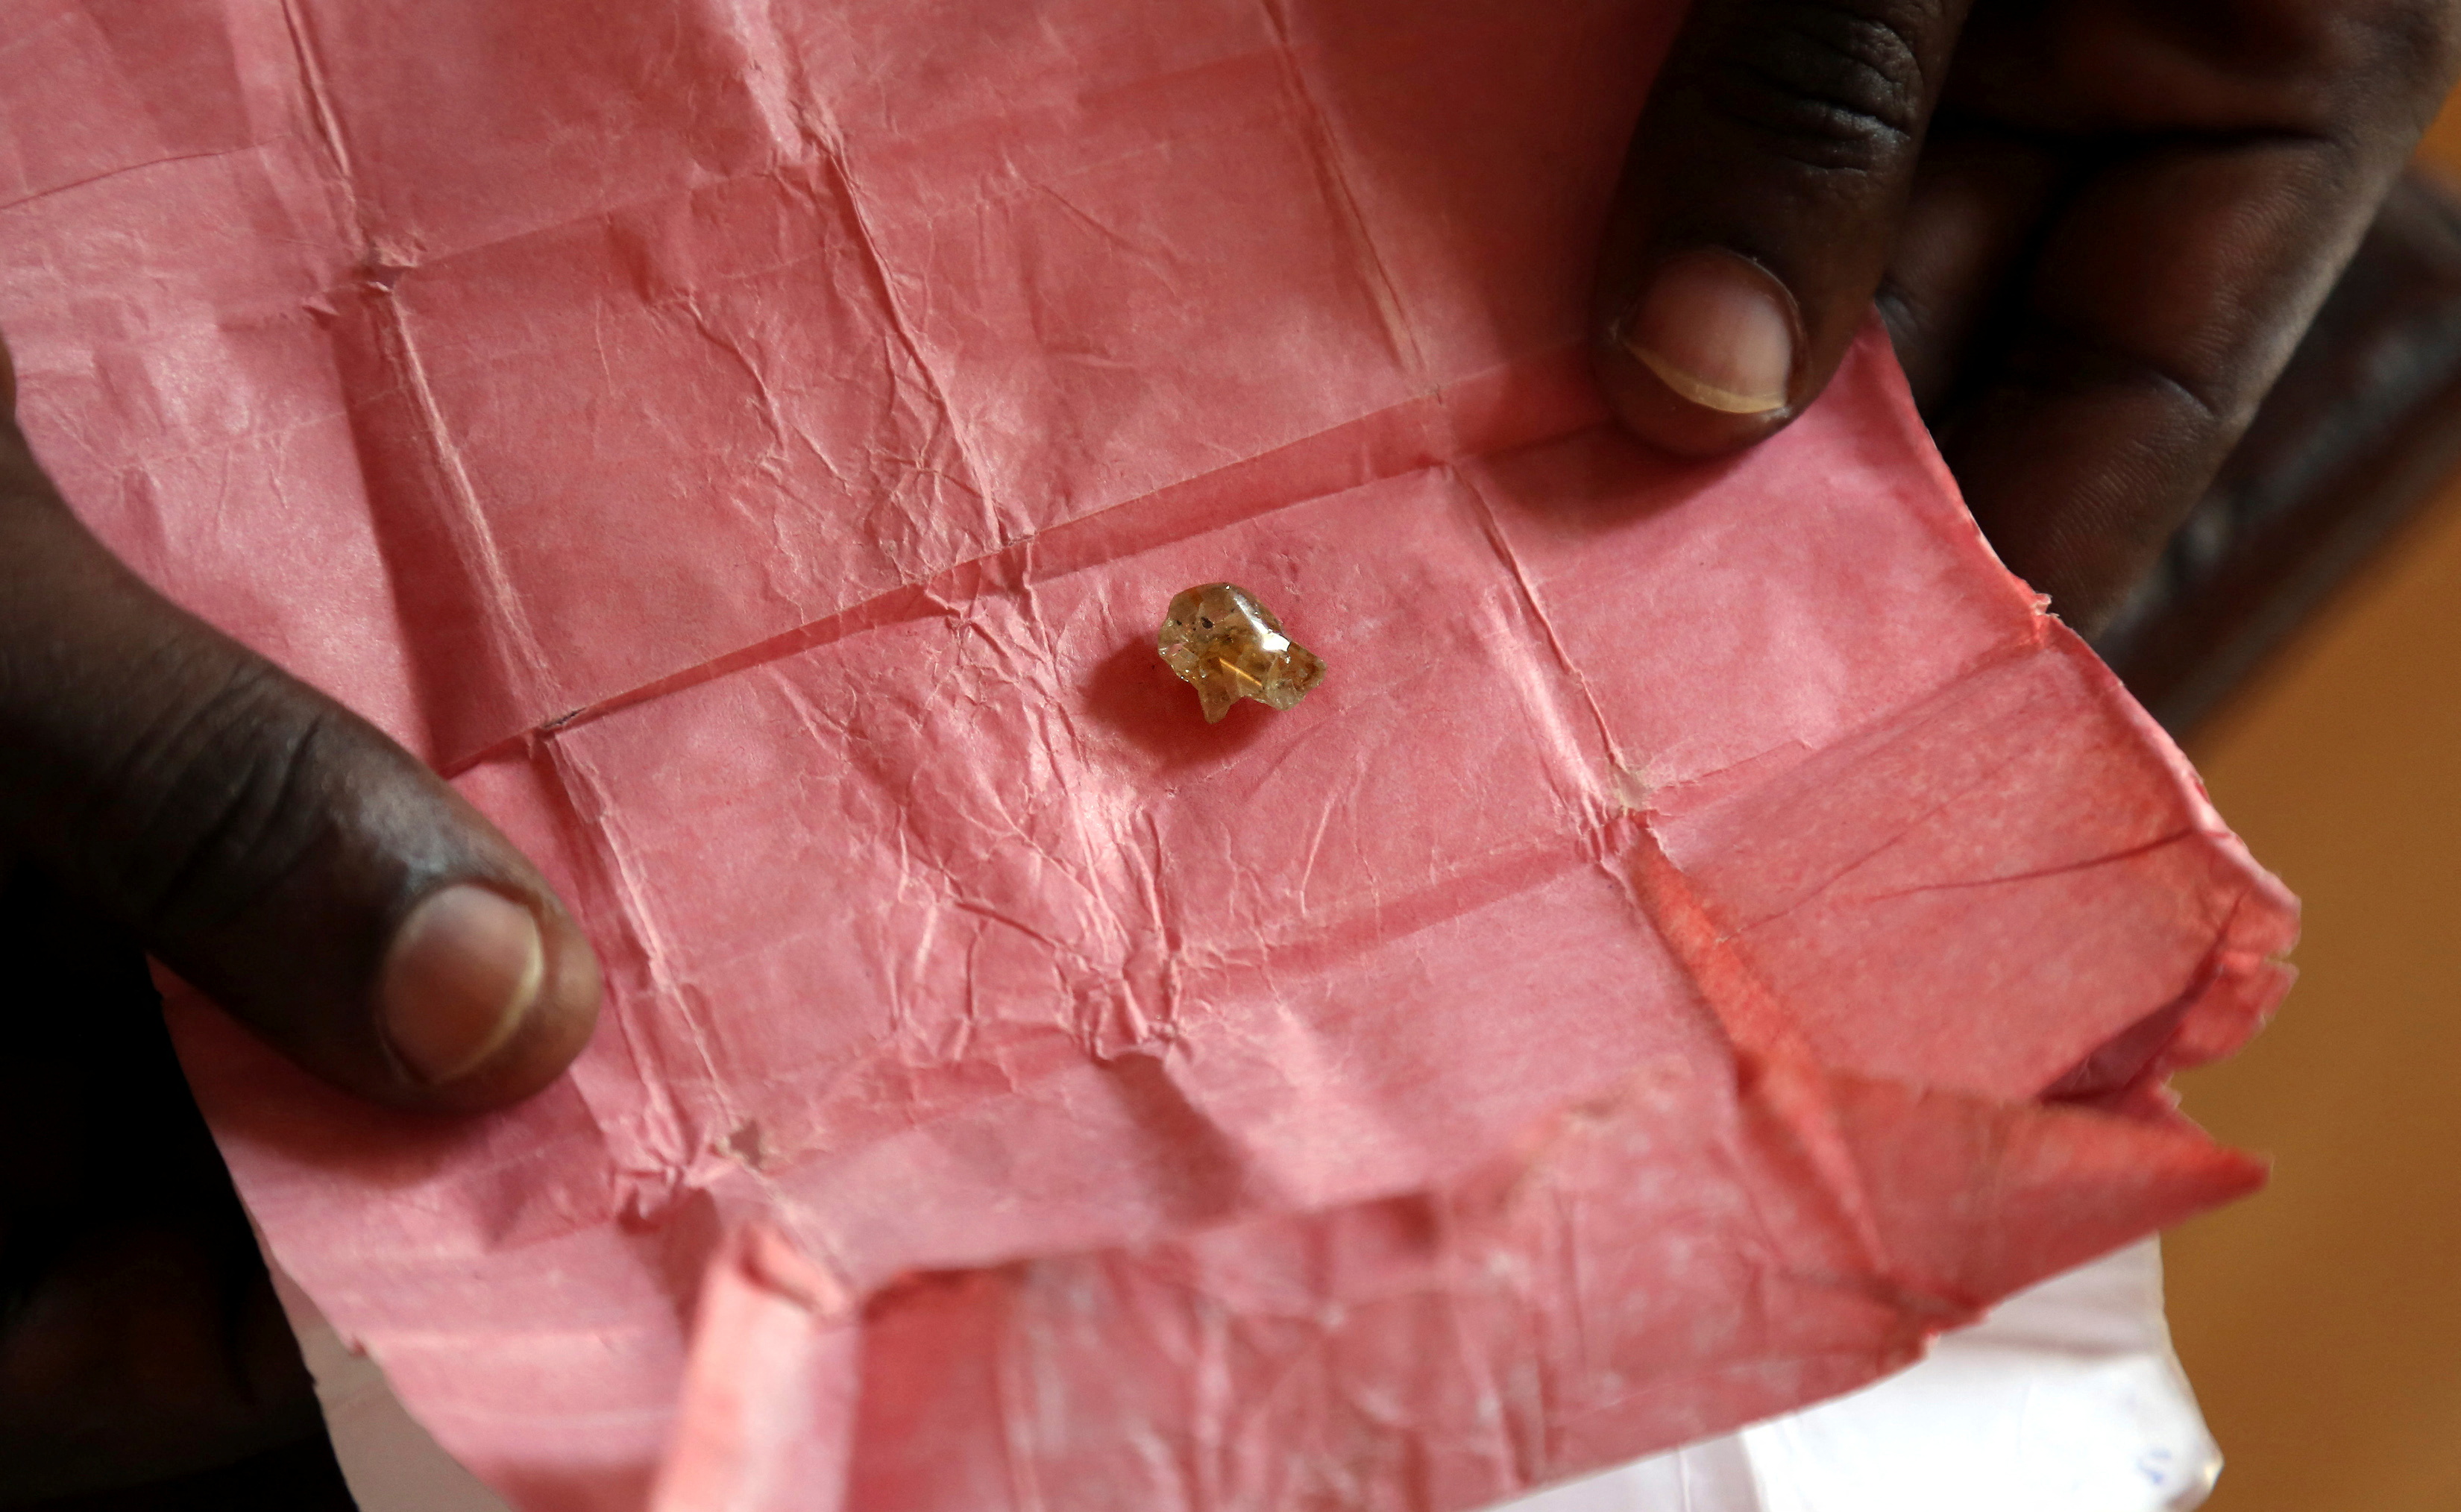 A man displays a rough diamond, from the Boda region, for sale in Bangui